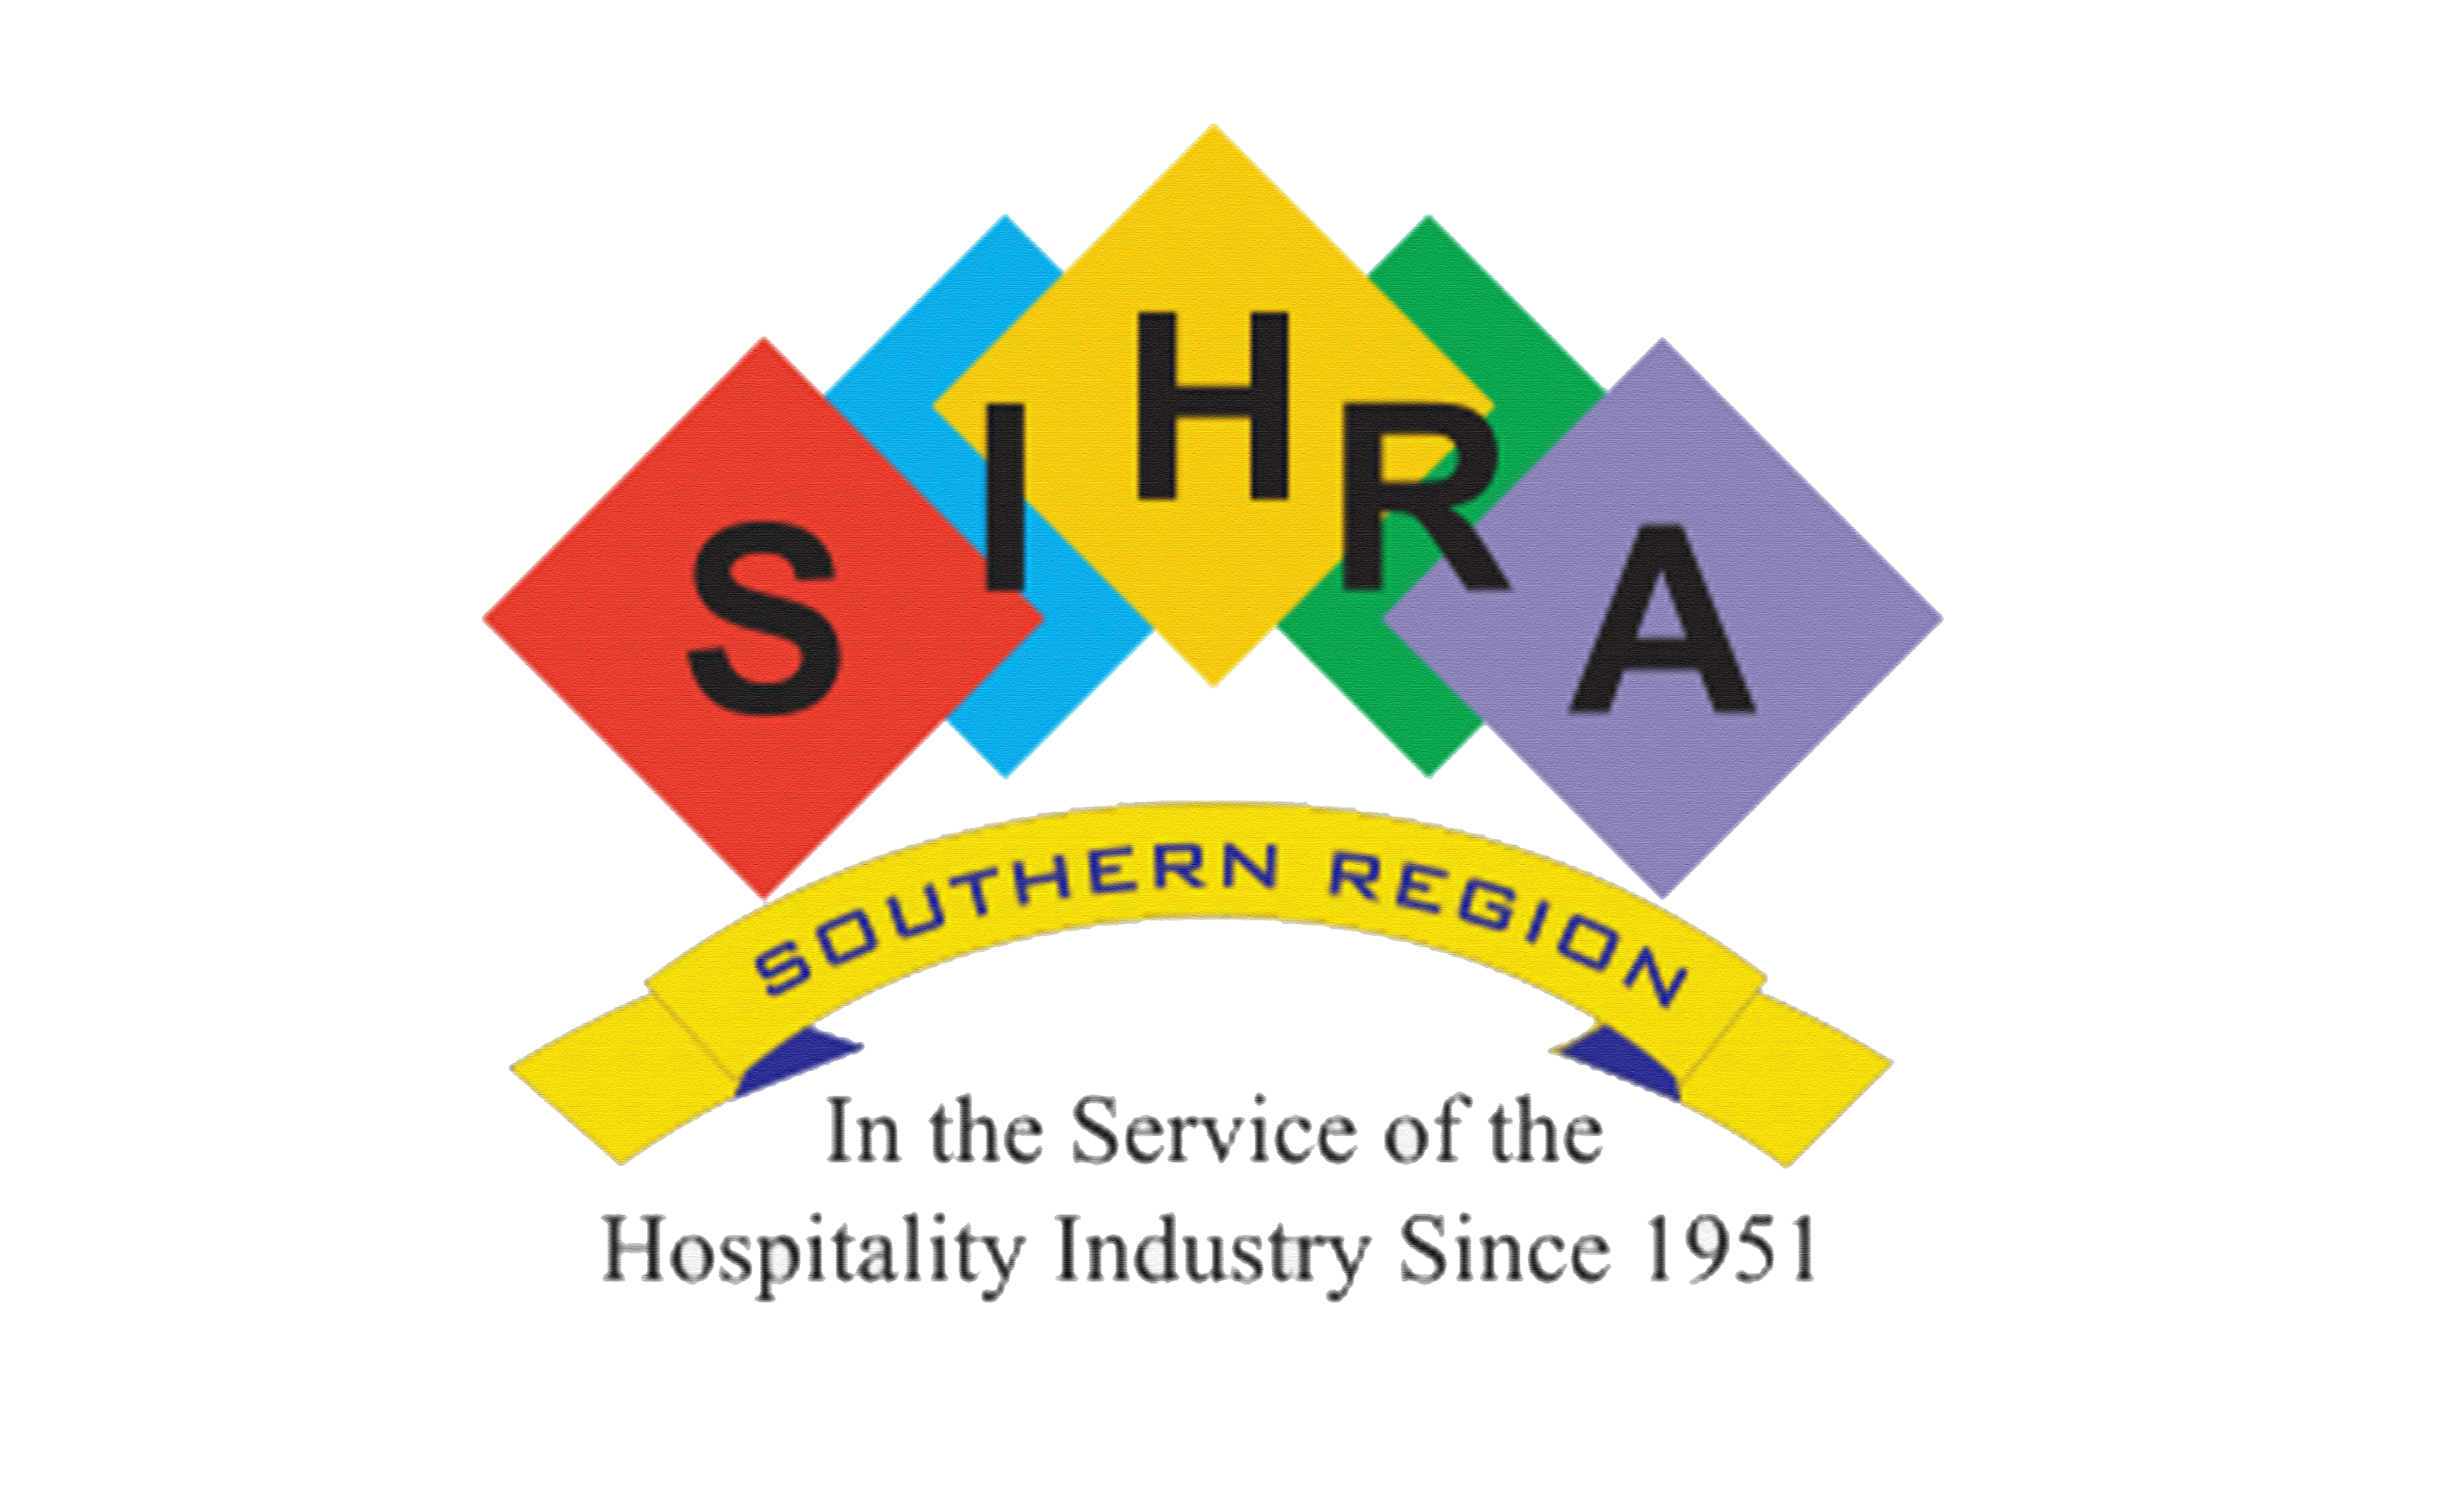 SIHRA announces its Annual Convention in Bangalore from 18 – 20 November